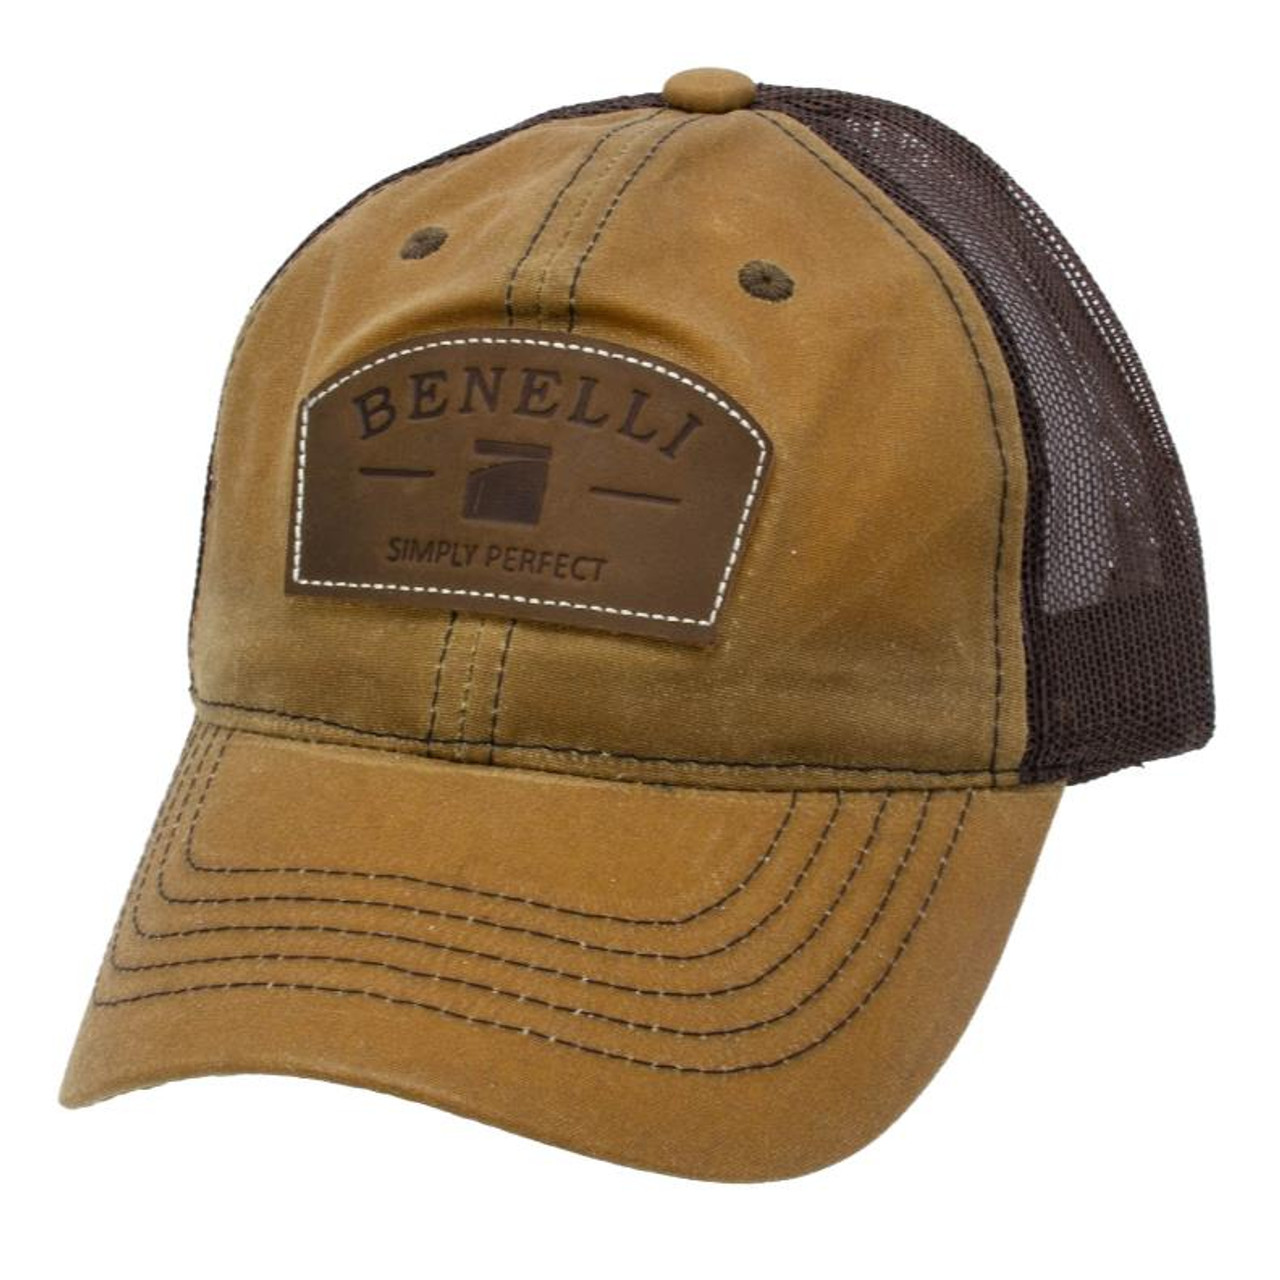 Benelli Logo Patch Hat - Waxed Tan #91212 - GameMasters Outdoors